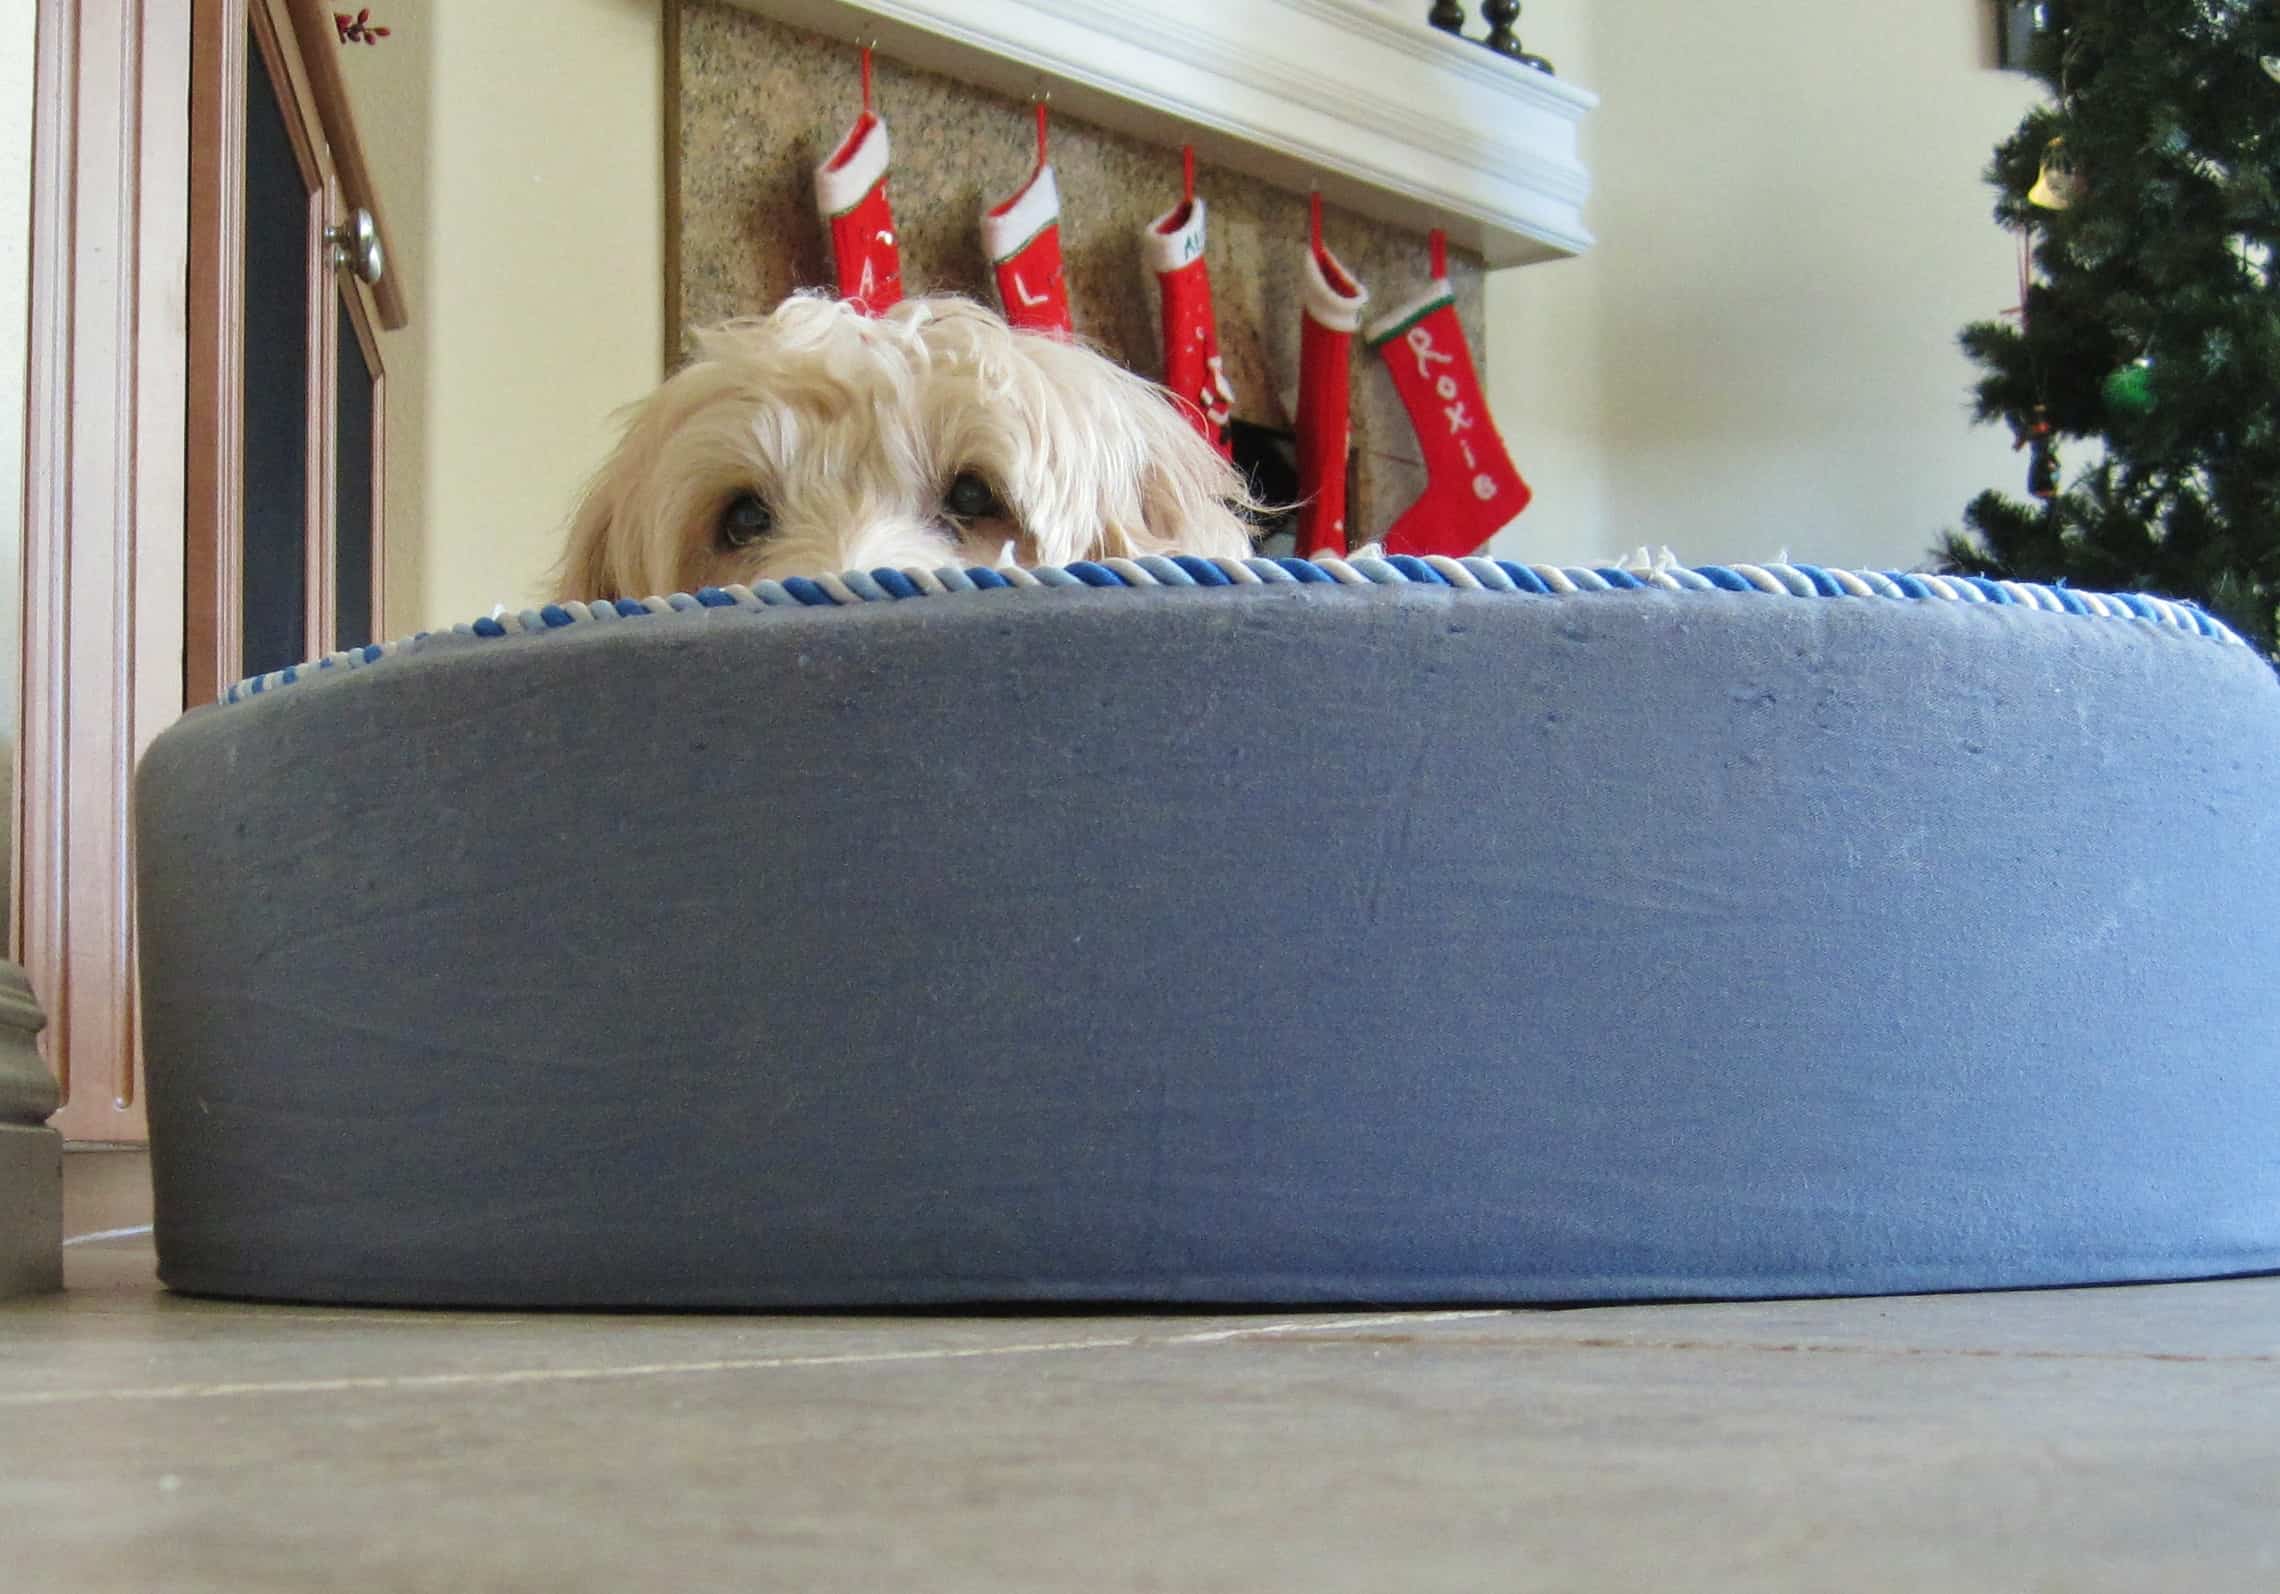 A fluffy dog peering out of a round dog bed.